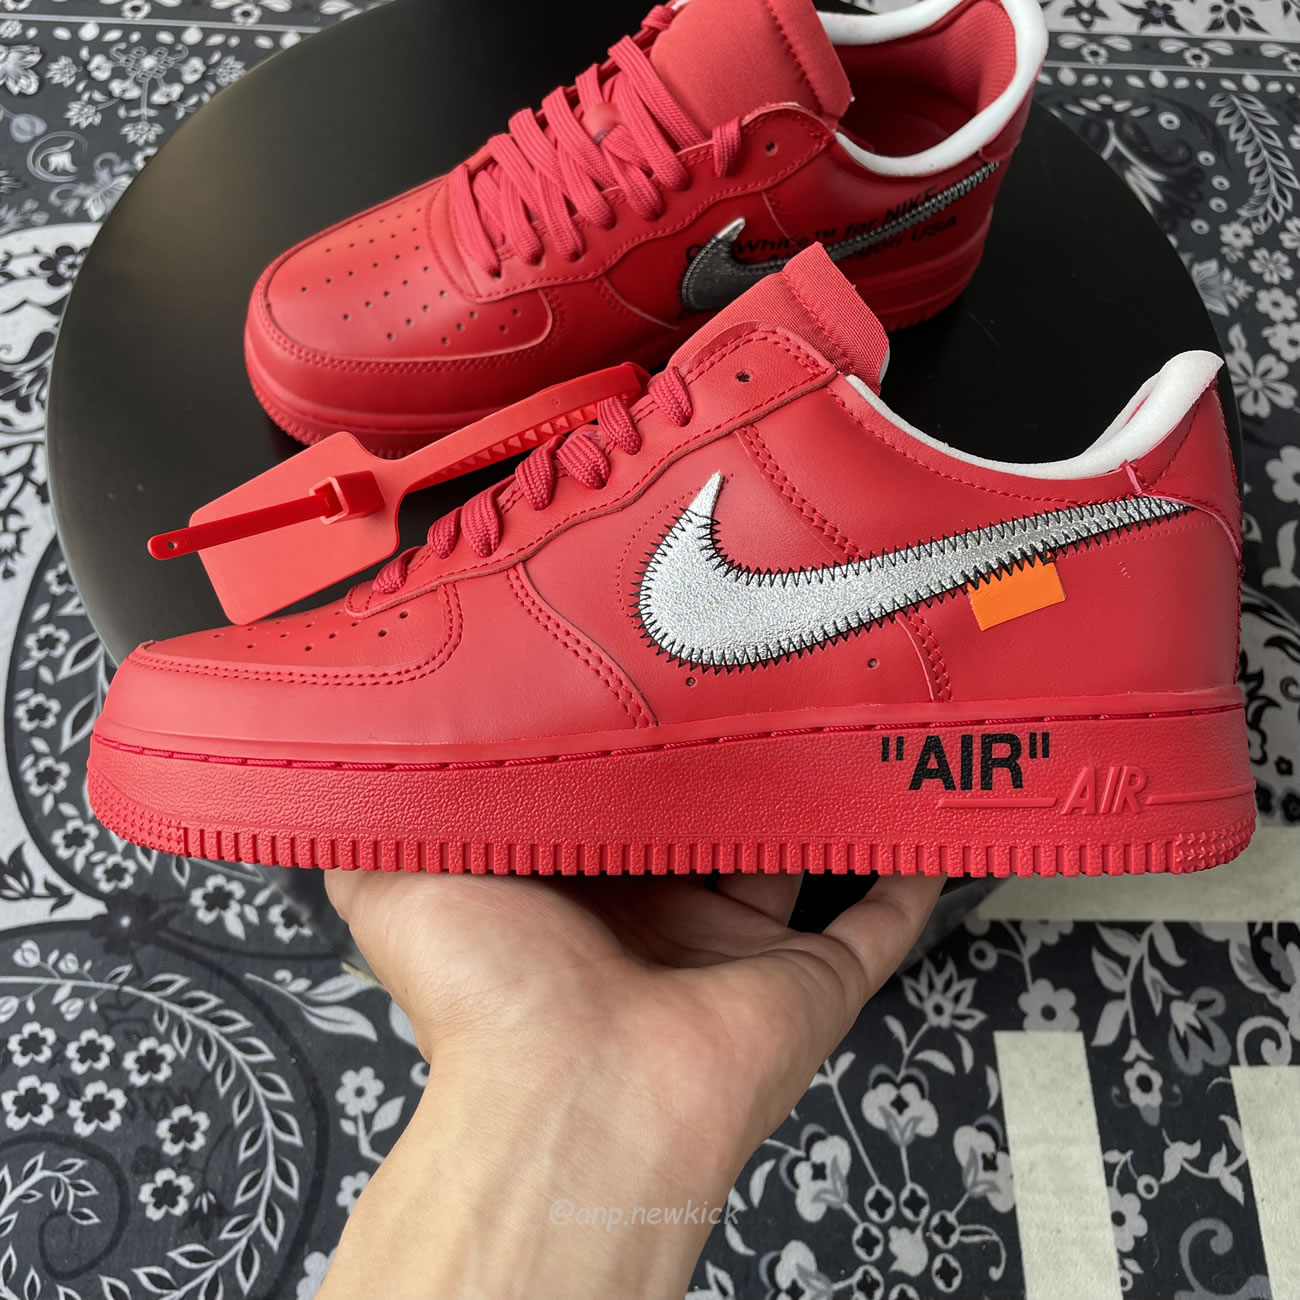 Nike Air Force 1 Low Off White Red Ao4297 600 (6) - newkick.org